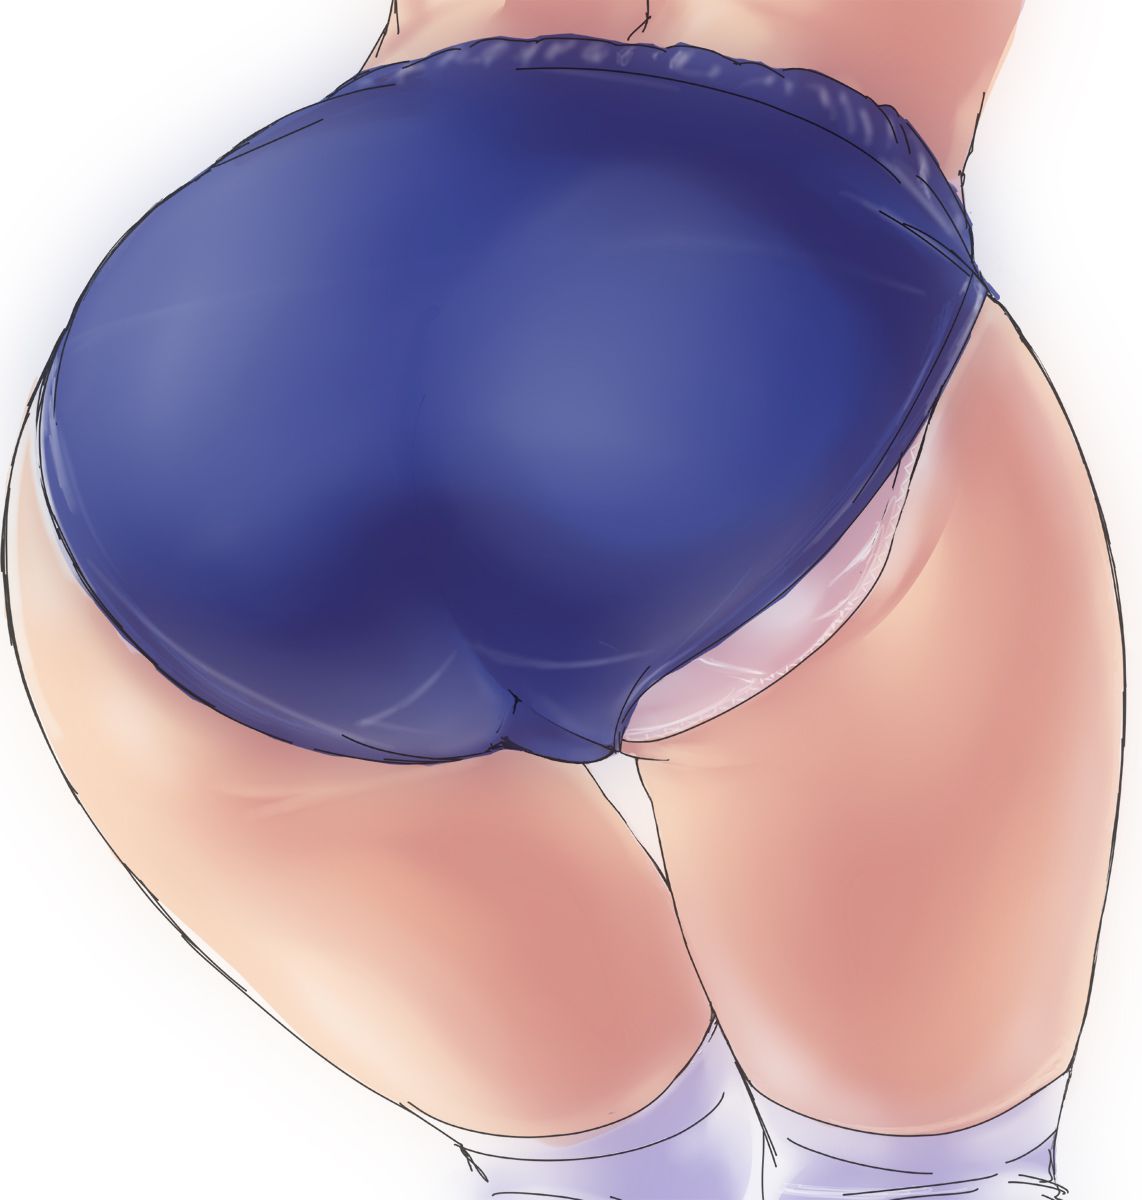 【Secondary erotica】 Here is an erotic image that can observe buttocks and in a close-up state 29